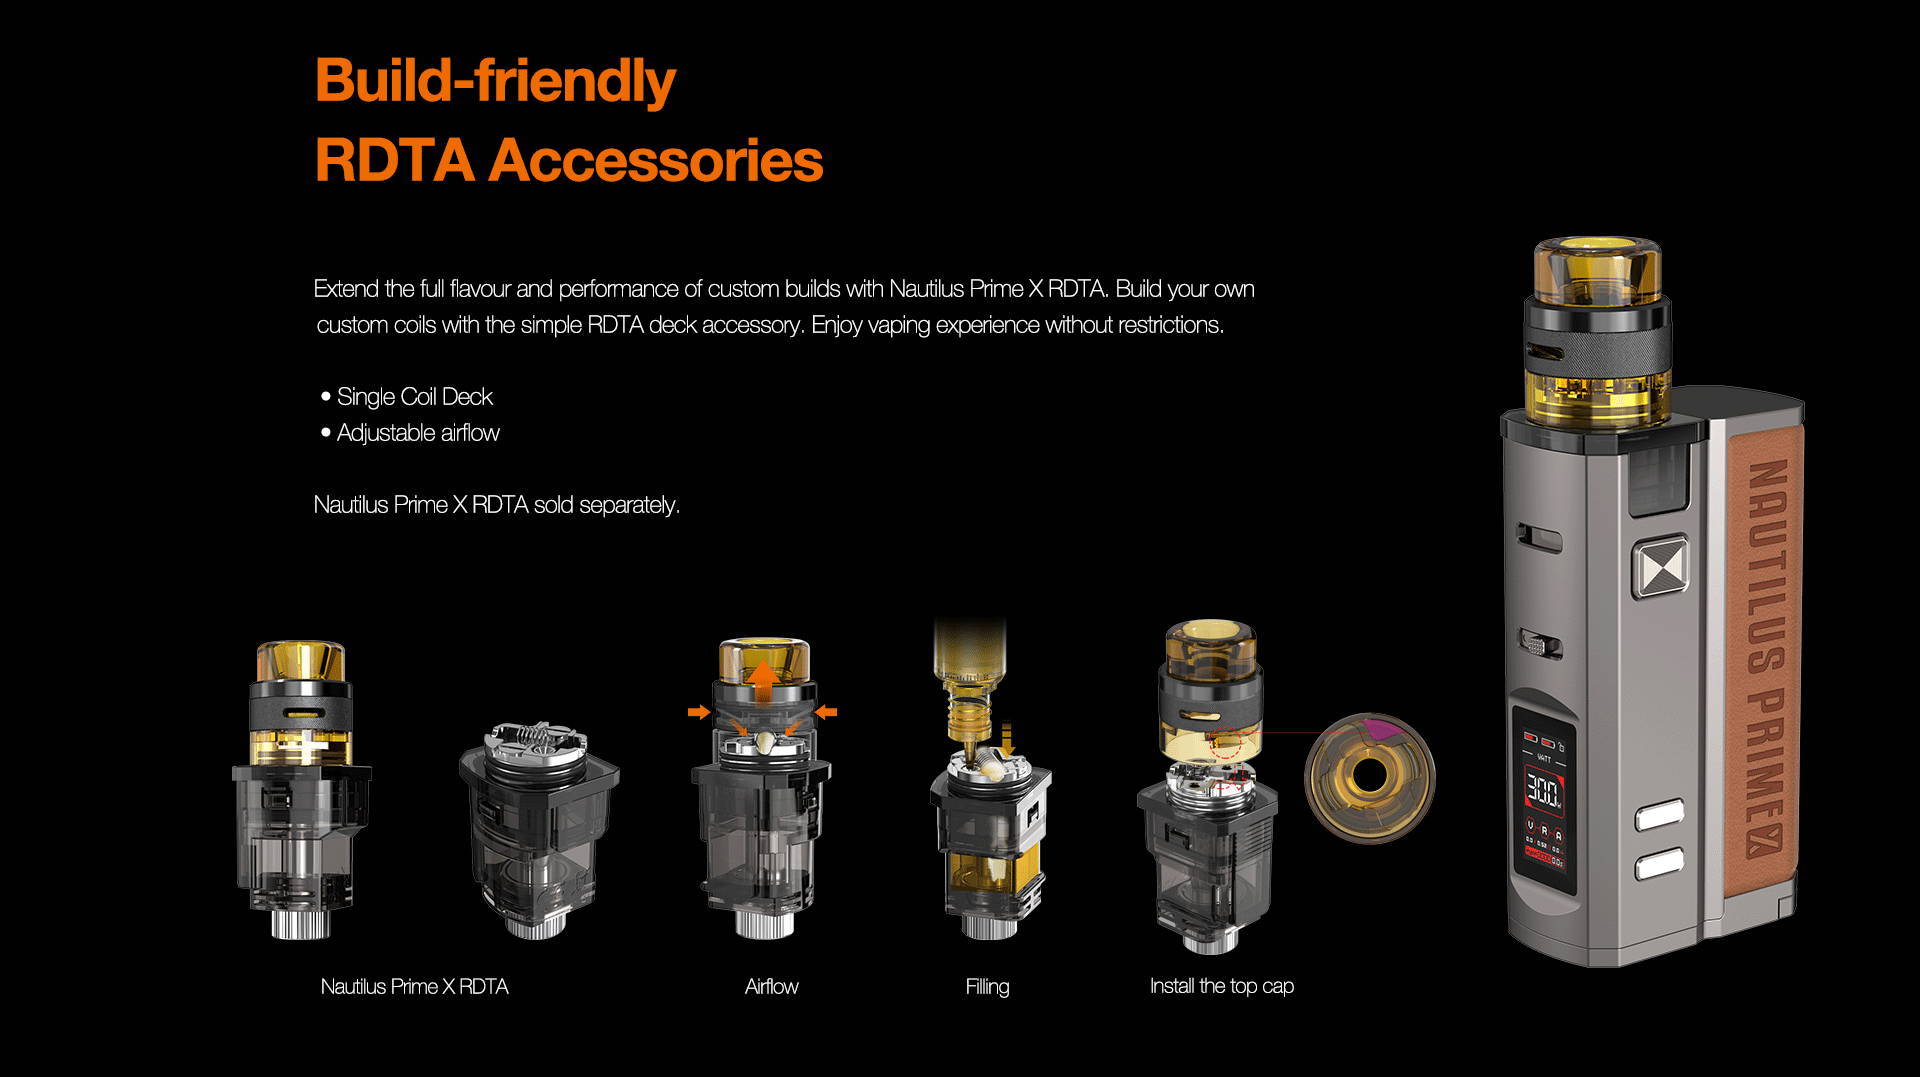 Build-friendly RDTA Accessories  Extend the full flavor and performance of custom builds with Nautilus Prime X RDTA. Easily build your coil with this simple yet complete RDTA deck accessories. Enjoy vaping experience without restrictions.       Single build Coil      Adjustable airflow  Nautilus Prime X RDTA sold separately. Available soon!